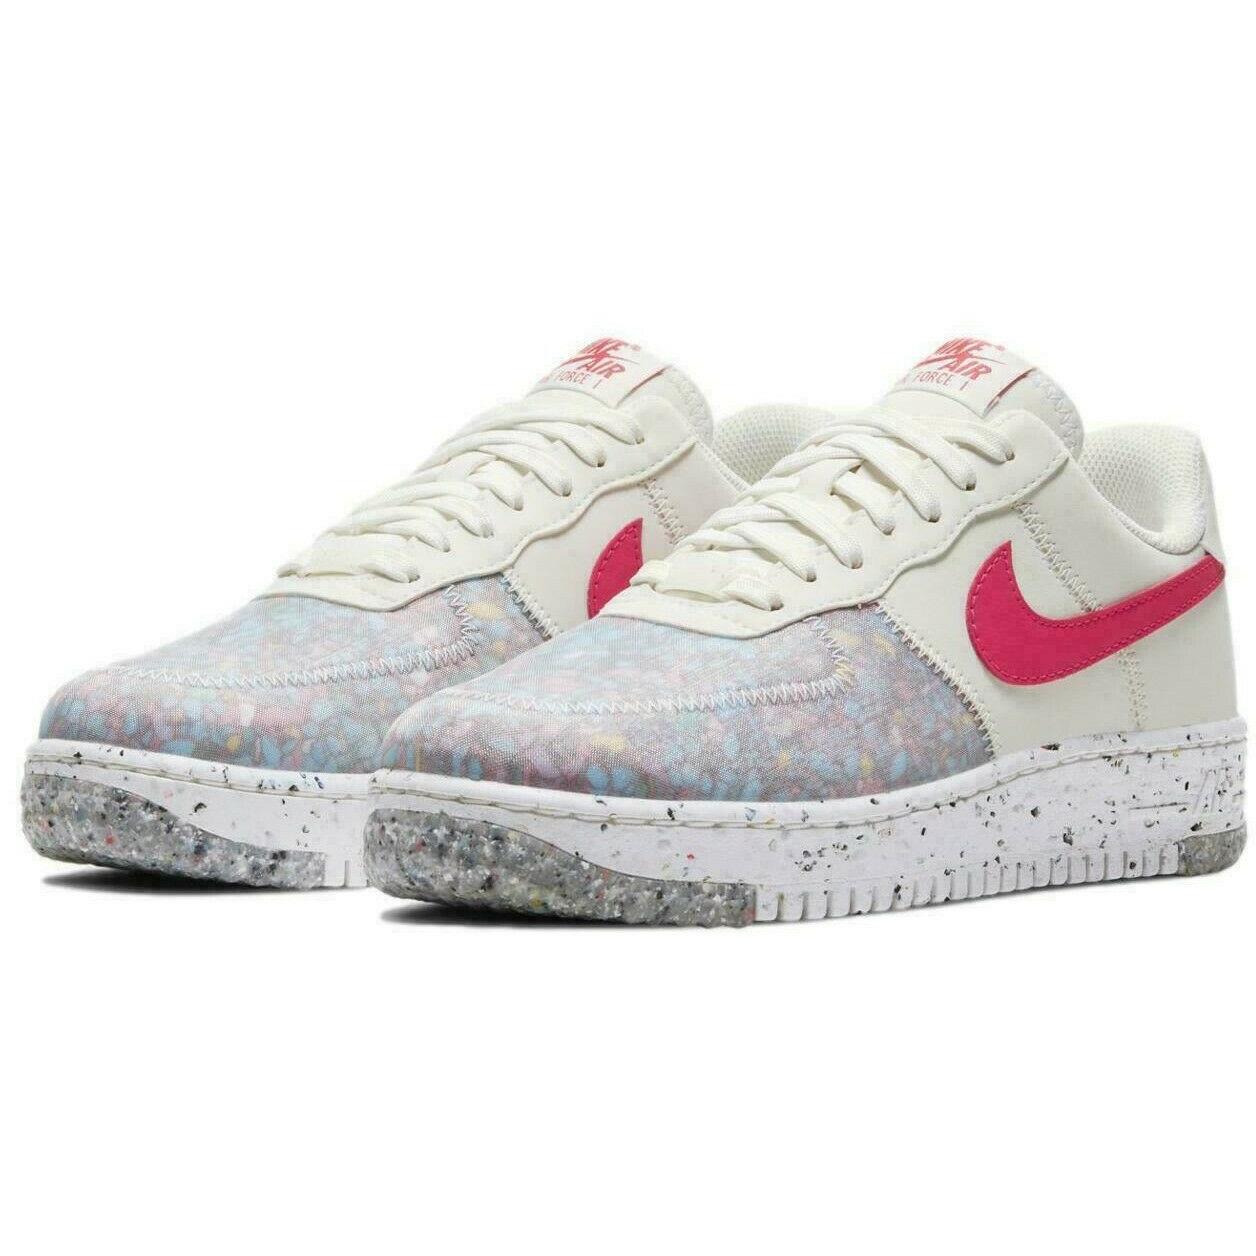 Nike Air Force 1 Crater Womens Size 7.5 Sneakers Shoes CT1986 101 Sired Red - Multicolor